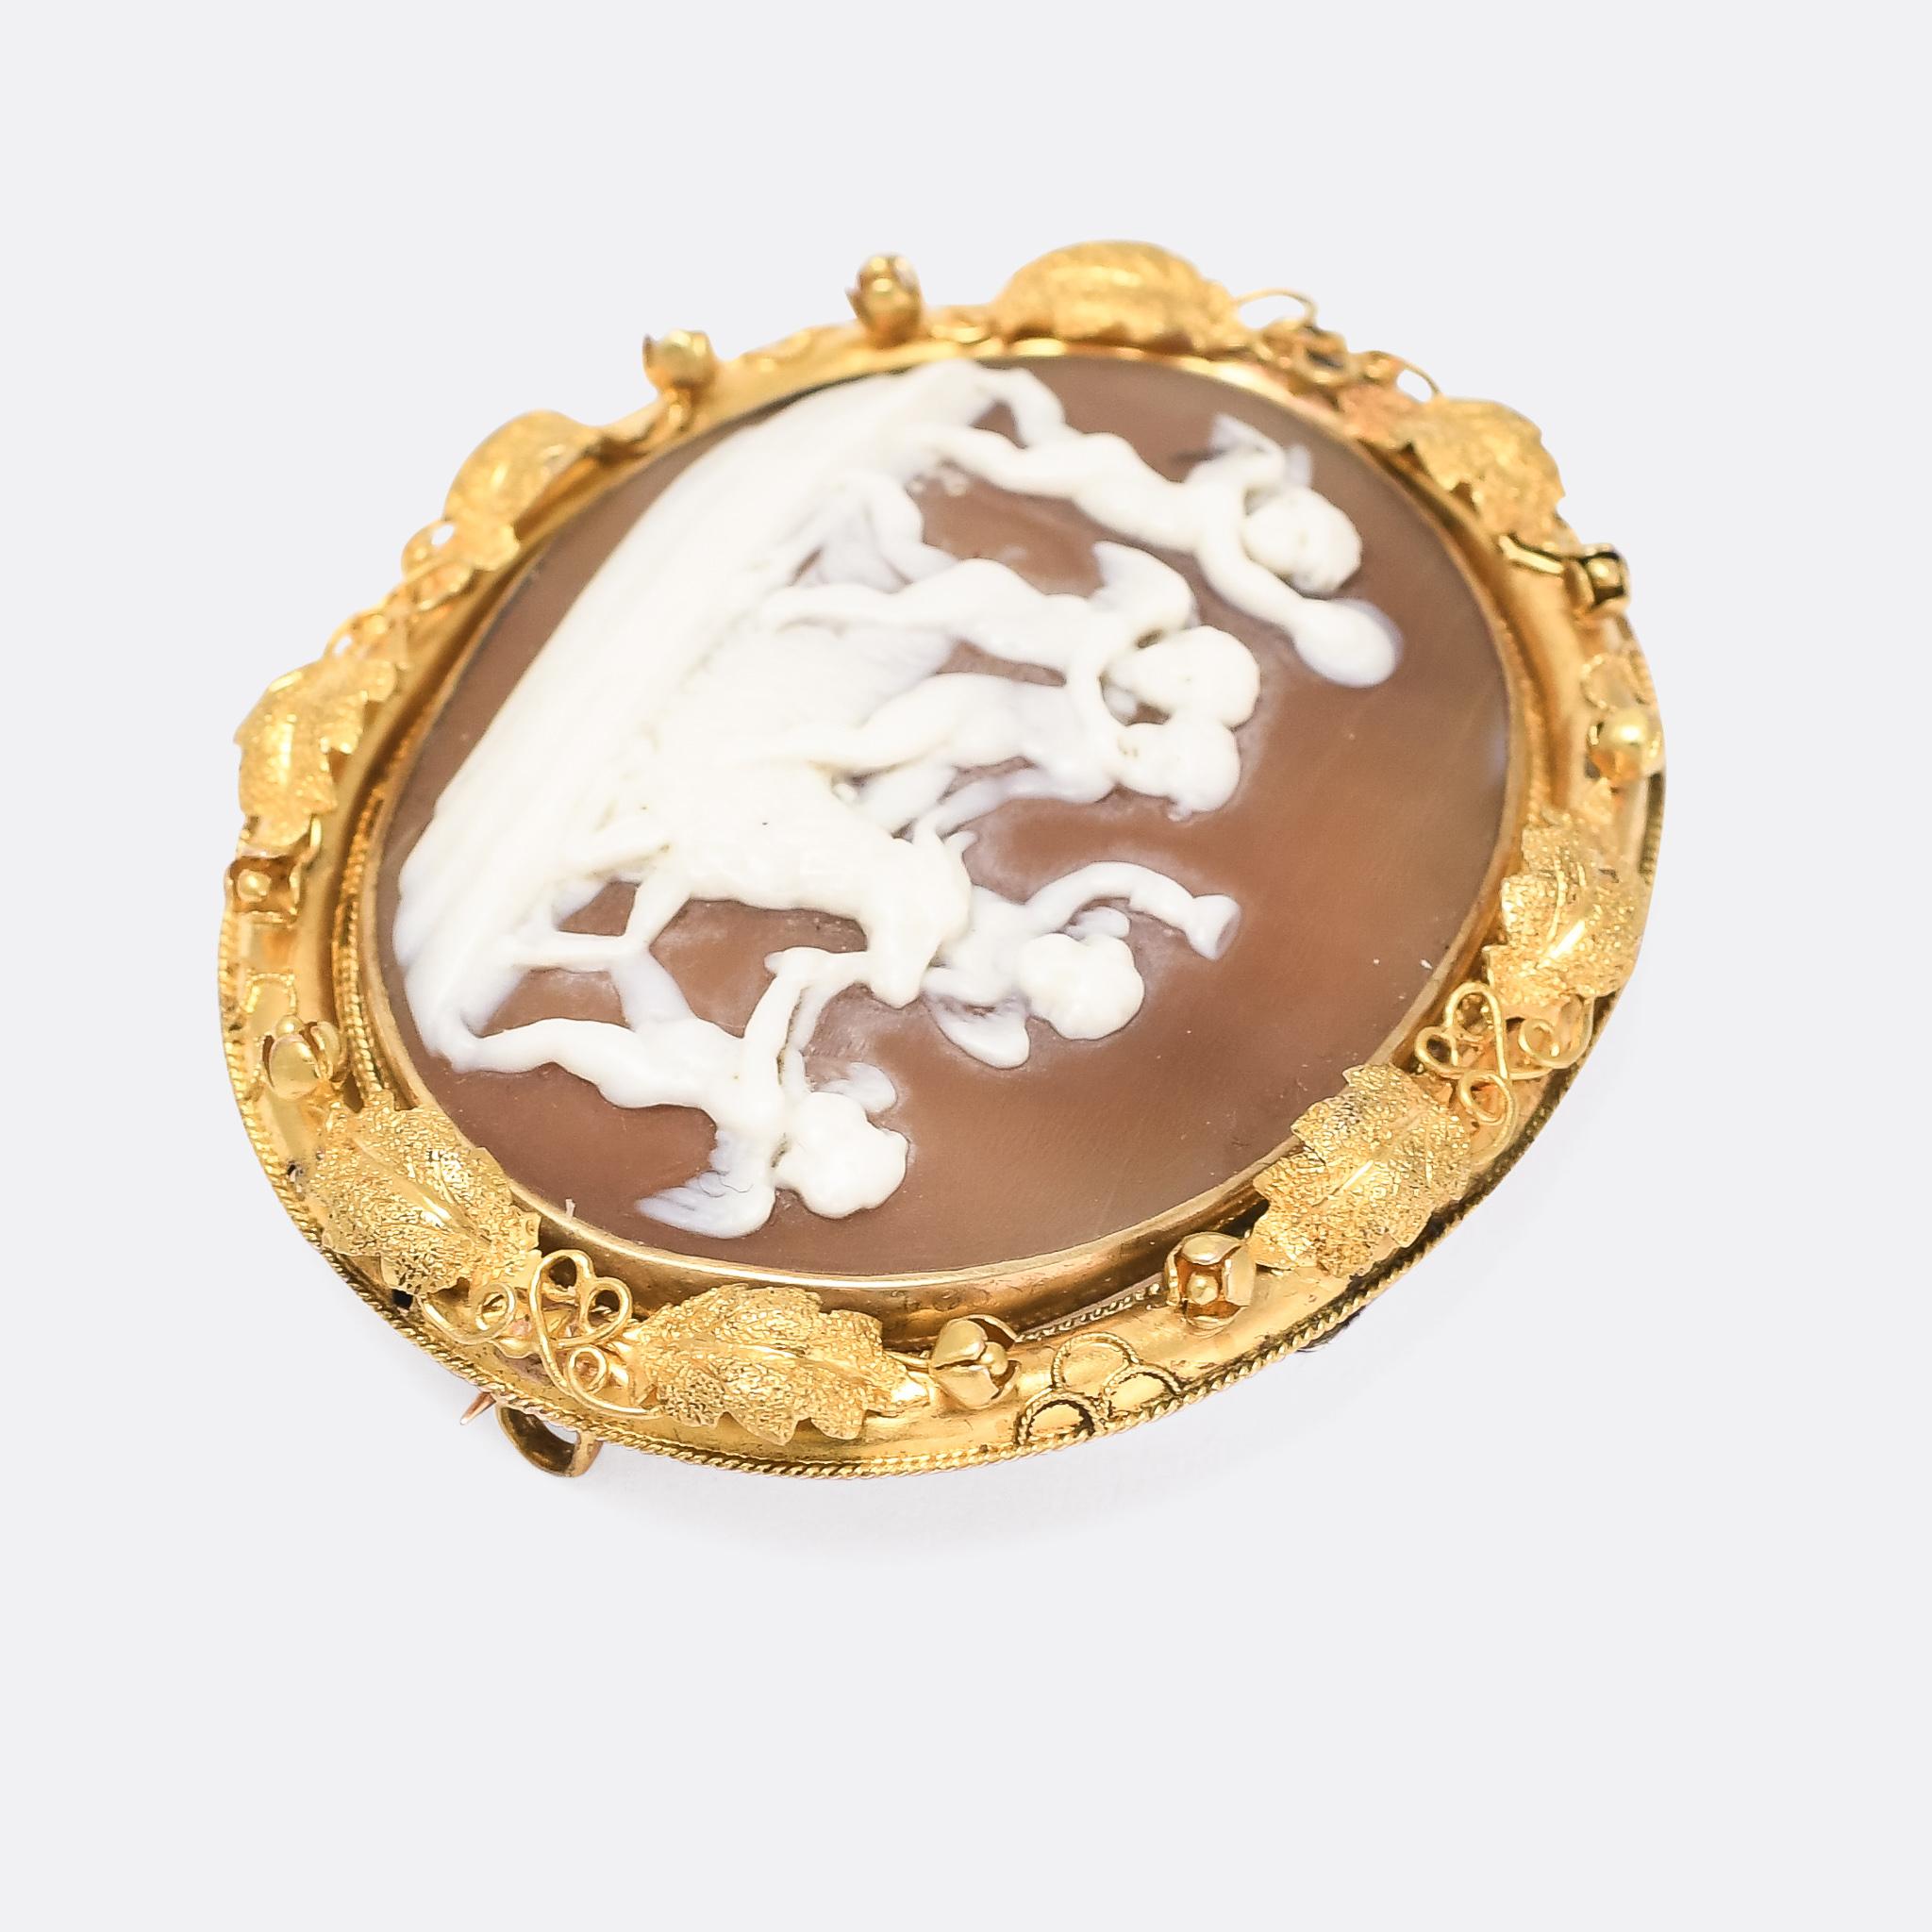 A stunning early Victorian cameo brooch depicting a bacchanal of putti, not dissimilar to the the 1620 marble relief by Flemish sculptor François Duquesnoy. The putti are seen drinking, clashing cymbals, dancing, and appearing to slaughter the goat.